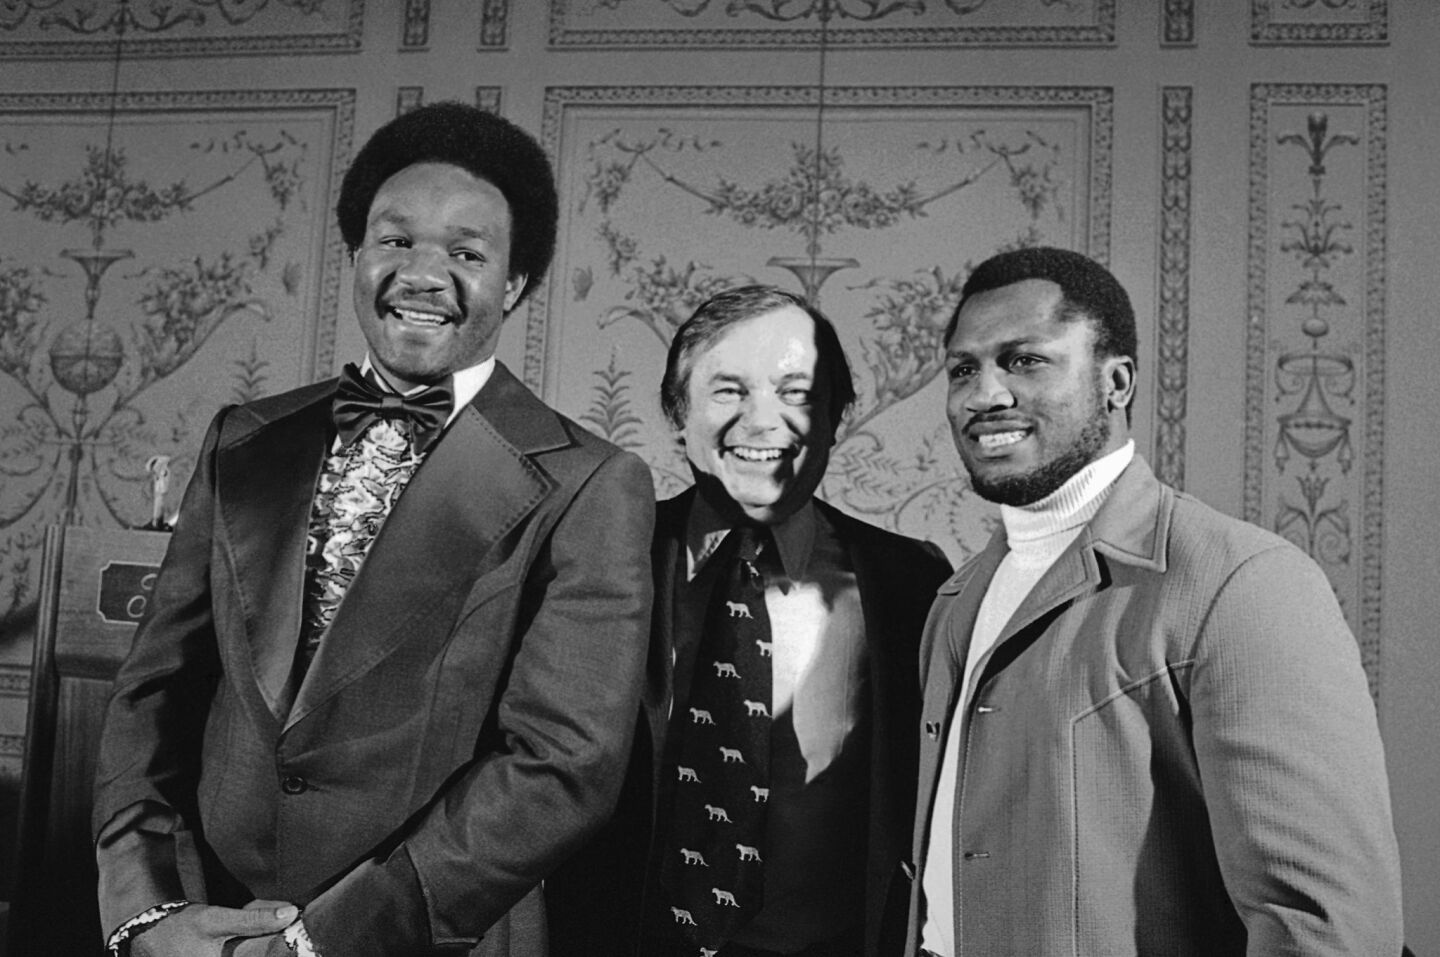 Former heavyweight champions George Foreman, left, and Joe Frazier, right, stand with promoter Jerry Perenchio in New York in April 1976 when it was announced they would meet that year in June for a boxing match.